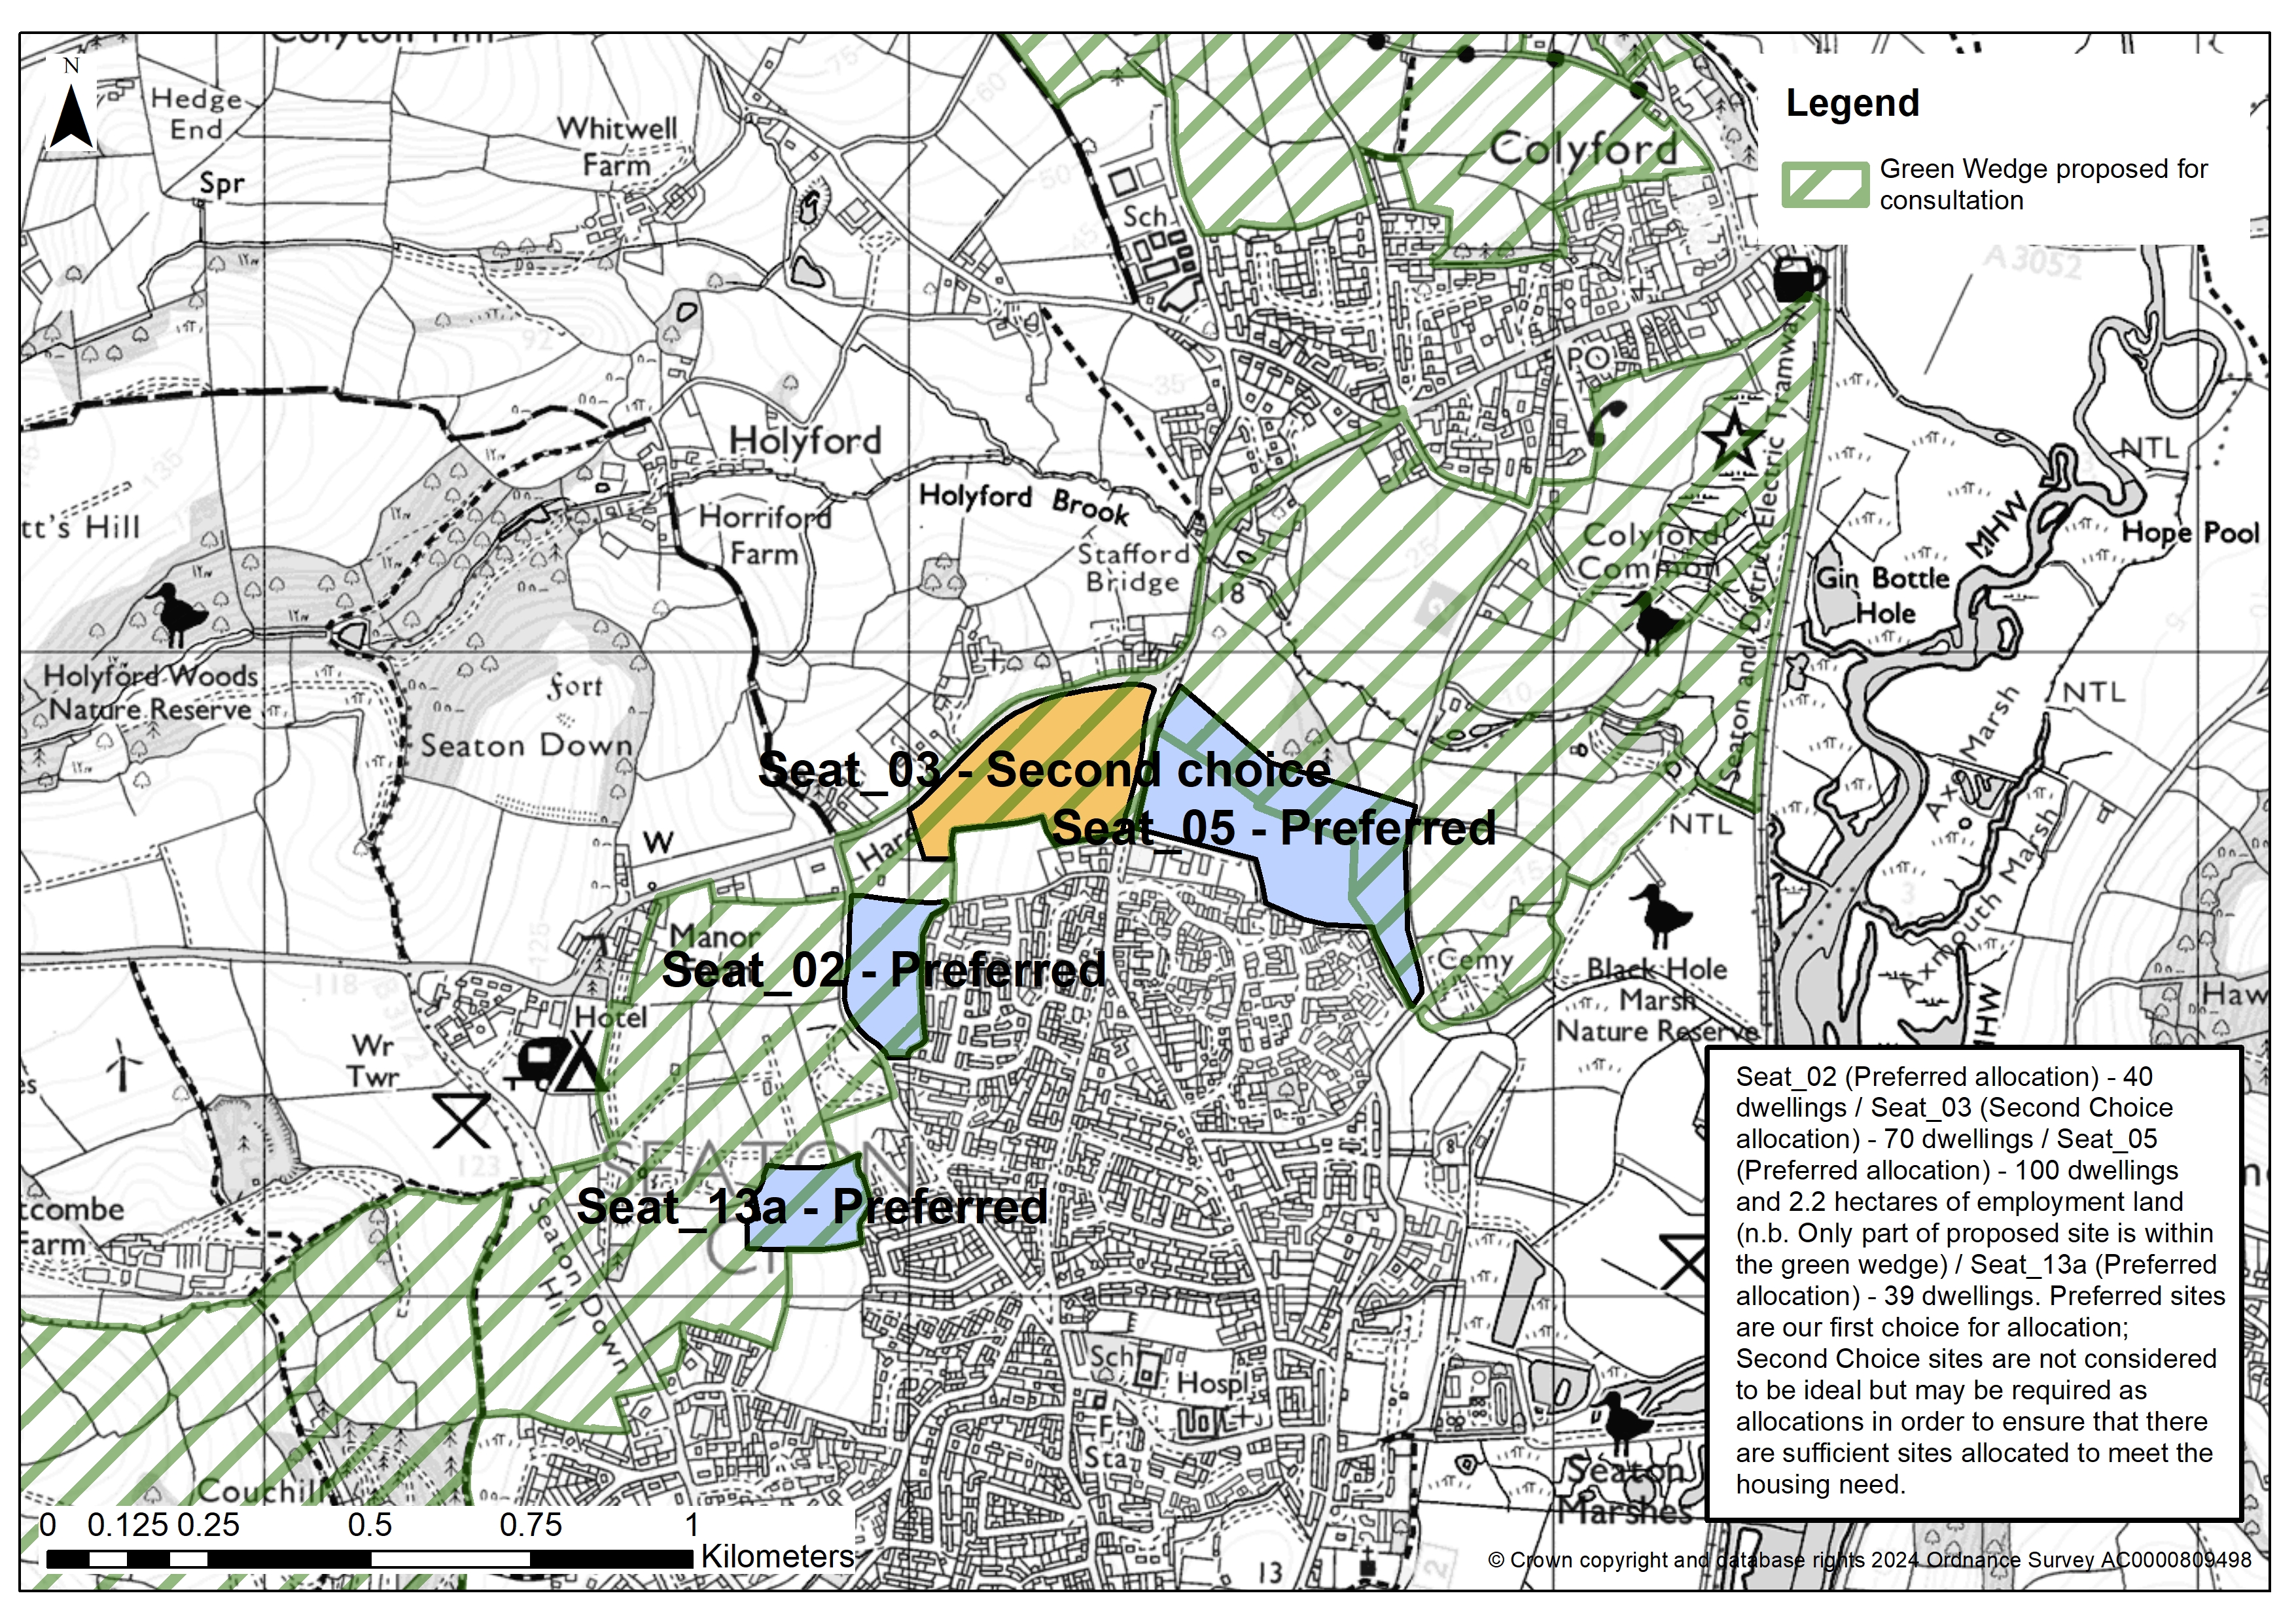 Map of the proposed Green Wedge between Seaton and Colyford